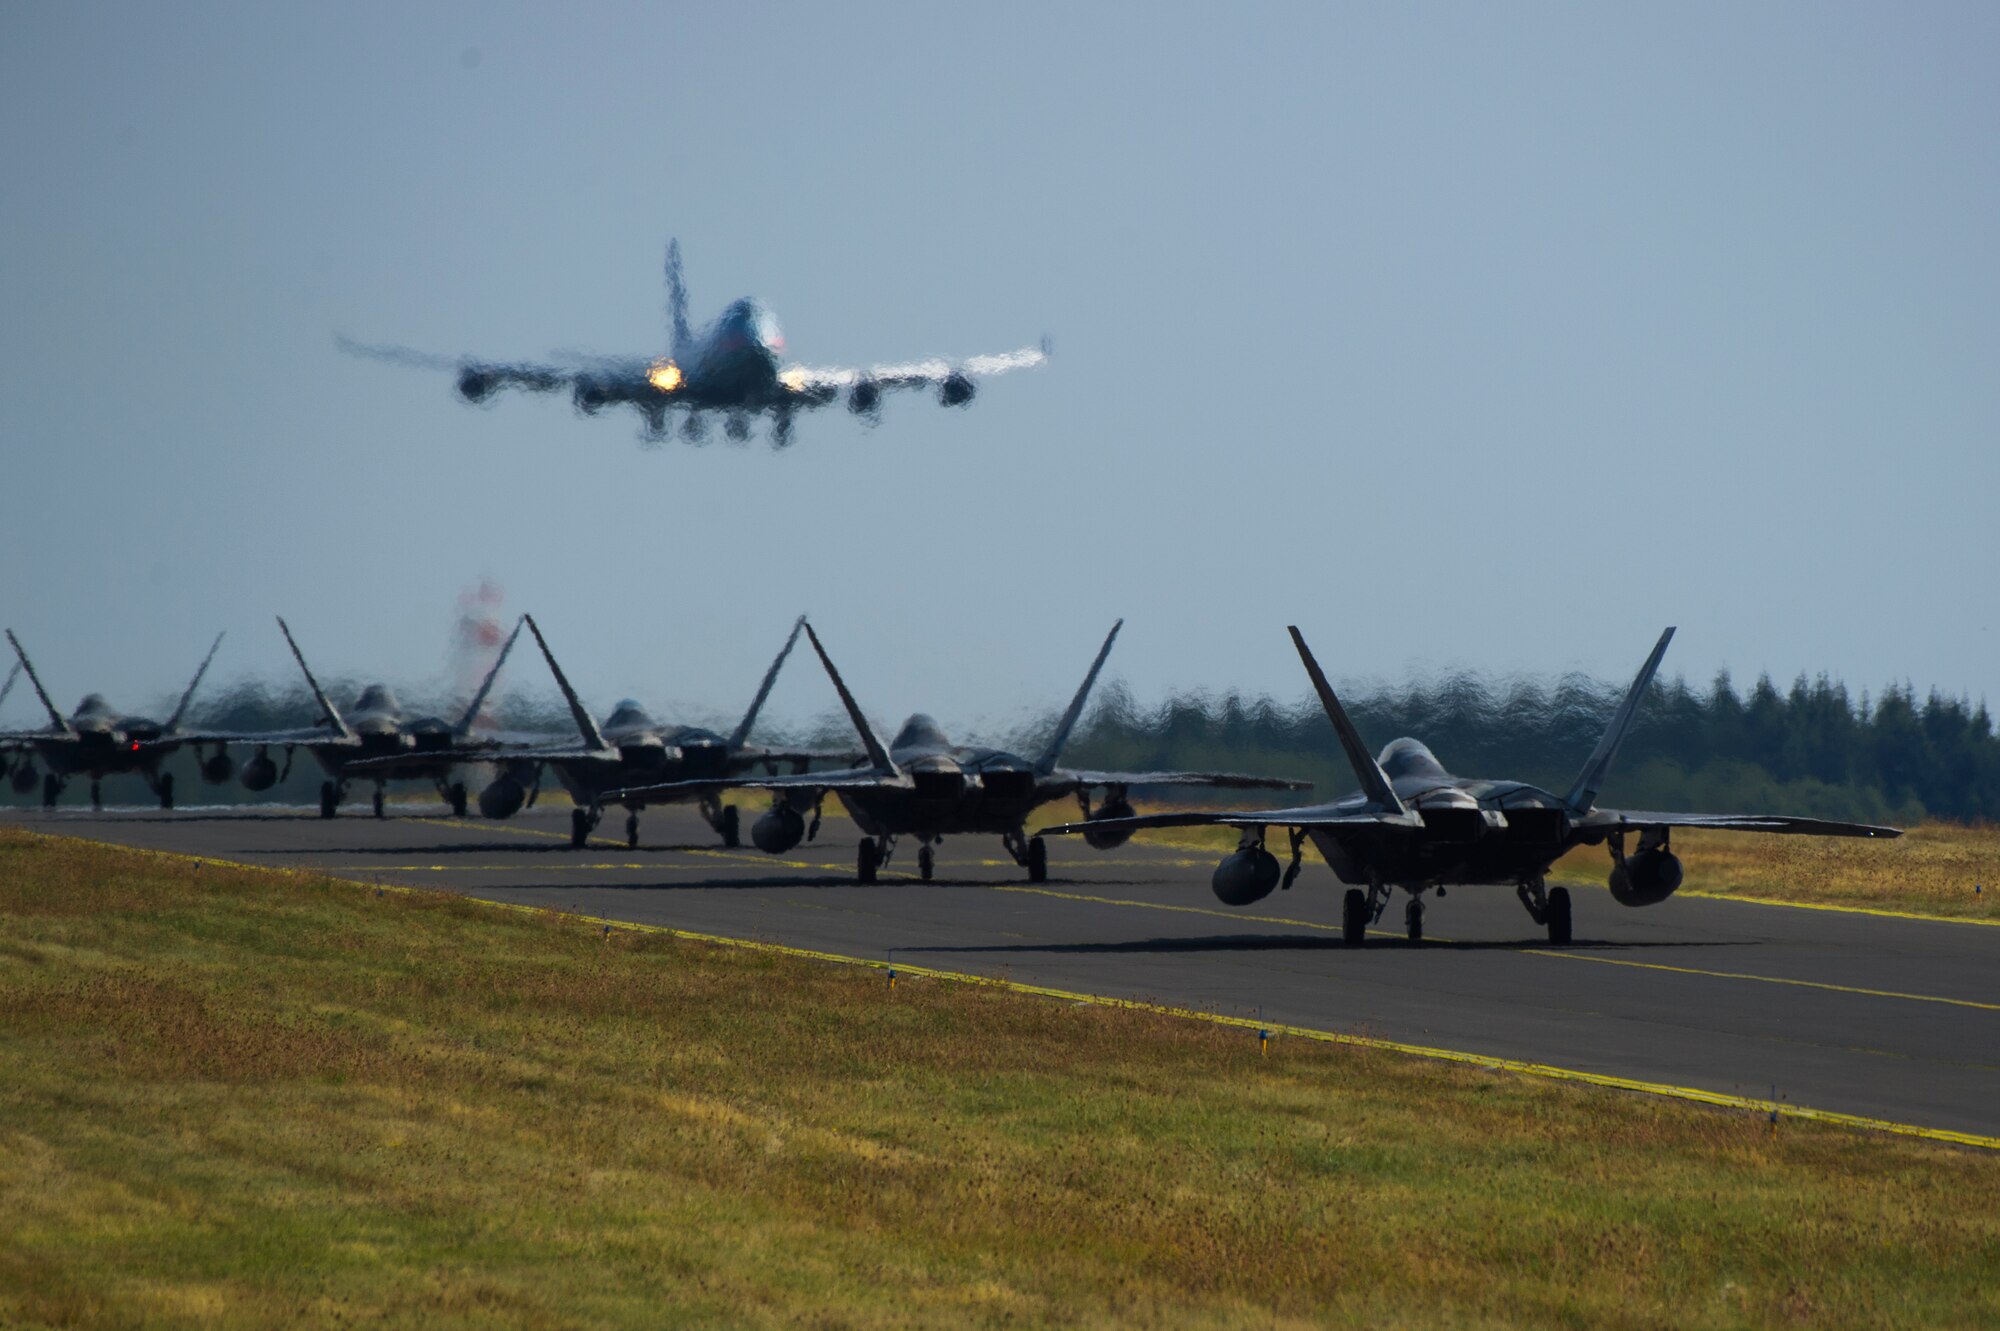 U.S. Air Force F-22 Raptors from the 95th Fighter Squadron, 325th Fighter Wing, Tyndall Air Force Base, Fla., taxi on the flightline at Spangdahlem Air Base, Germany, Aug. 29, 2018. The 95th FS deployed to Spangdahlem to conduct familiarization flight training with U.S. Air Forces in Europe-Air Forces Africa aircraft and Airmen. (U.S. Air Force photo by Airman 1st Class Valerie Seelye)